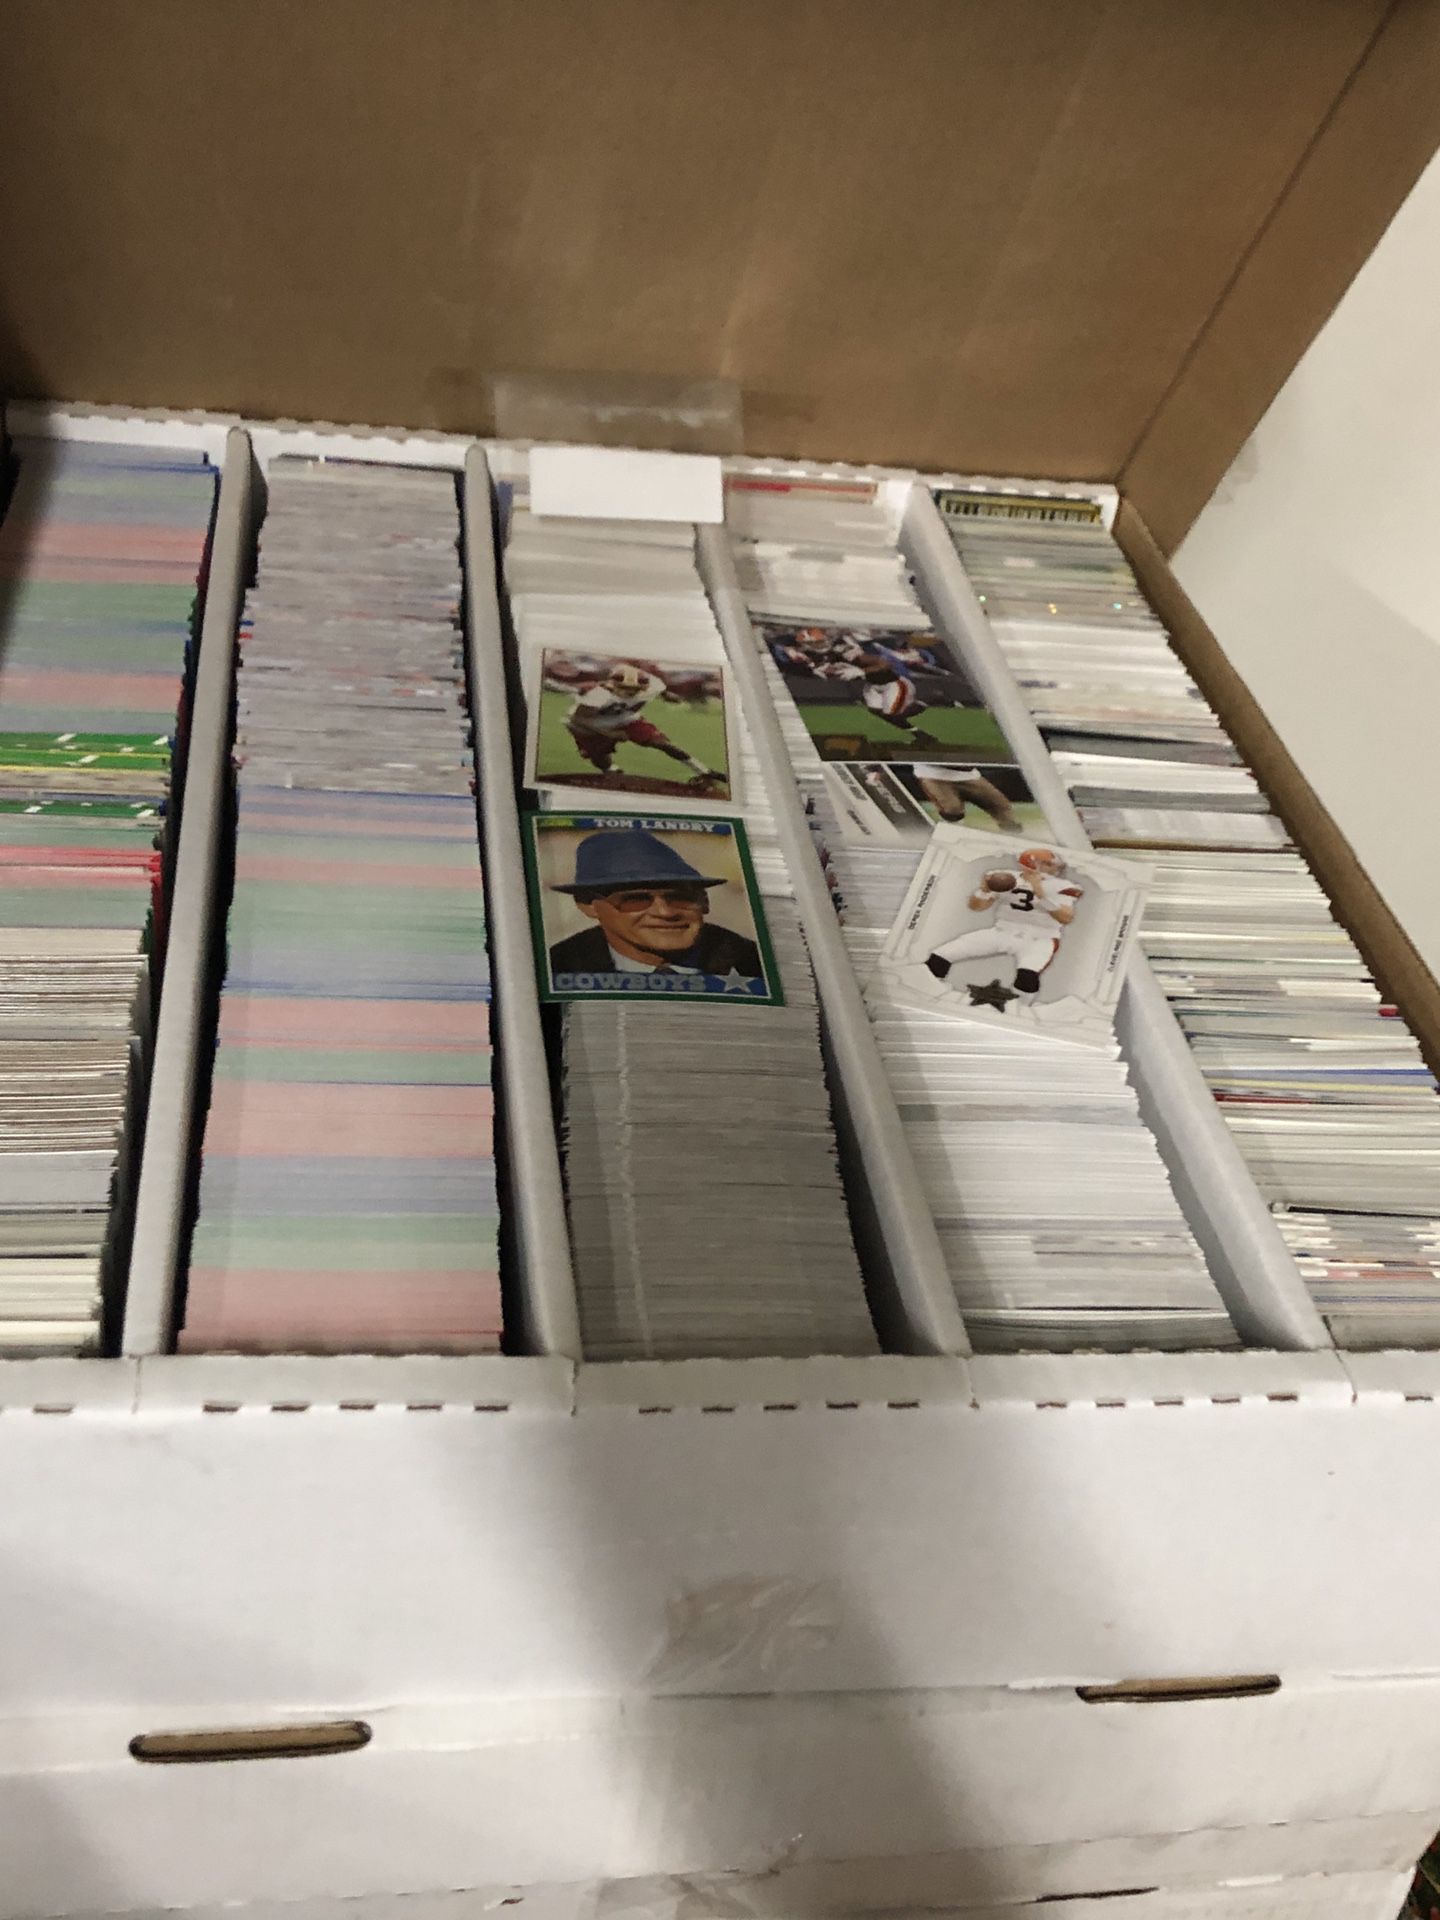 145,000 Unsearched Football & Basketball & Baseball Cards! 28 Boxes of Approx 5,000 Cards Ea Box! PRICE PER BOX/BULK PRICE NEGOTIABLE!